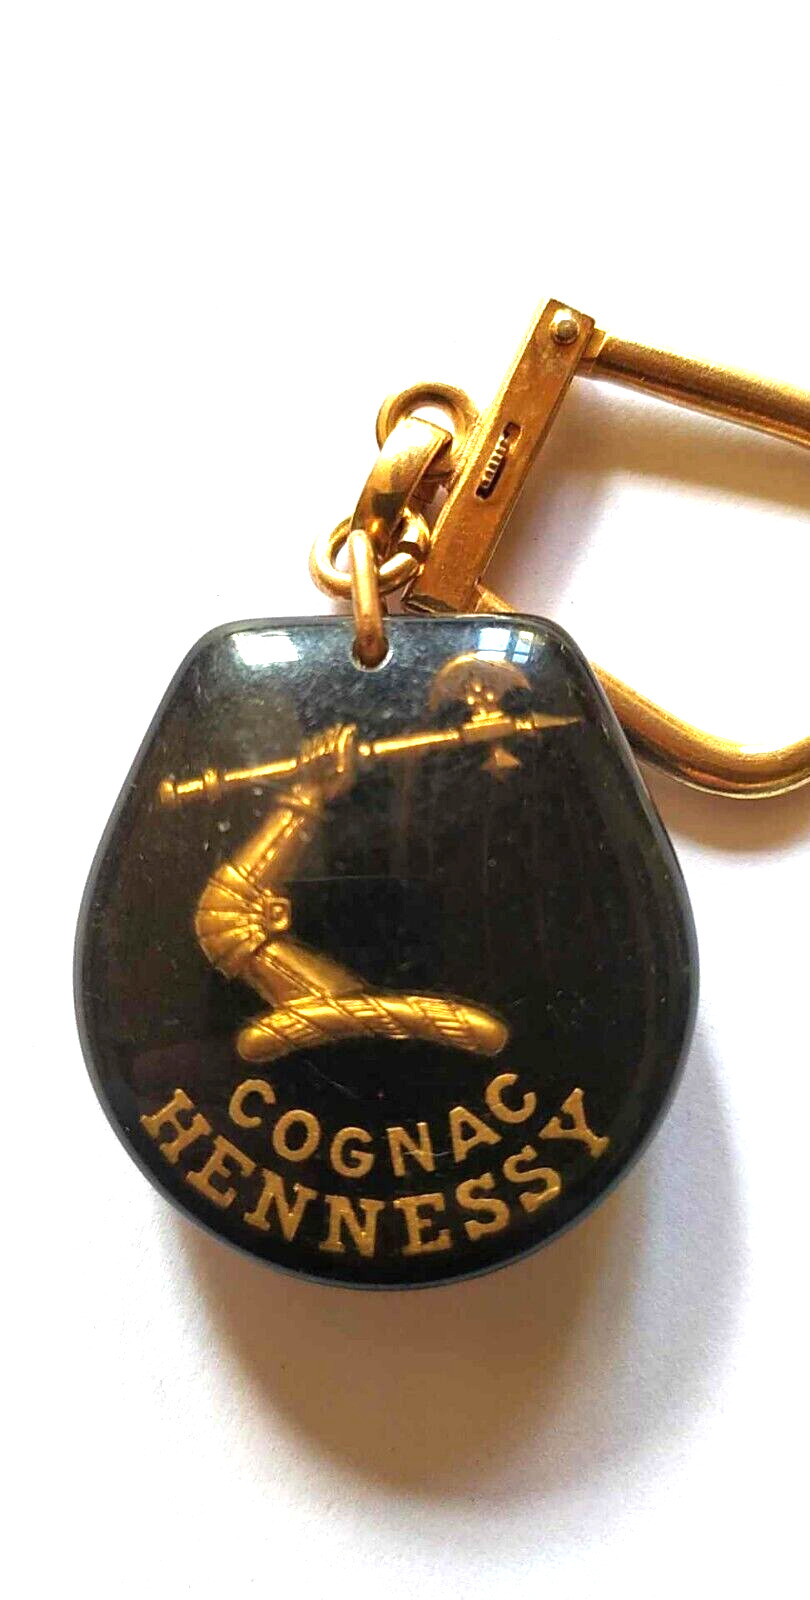 Antique Key Ring Bourbon Cognac Hennessy Forearm Guerrier Vintage Years 60